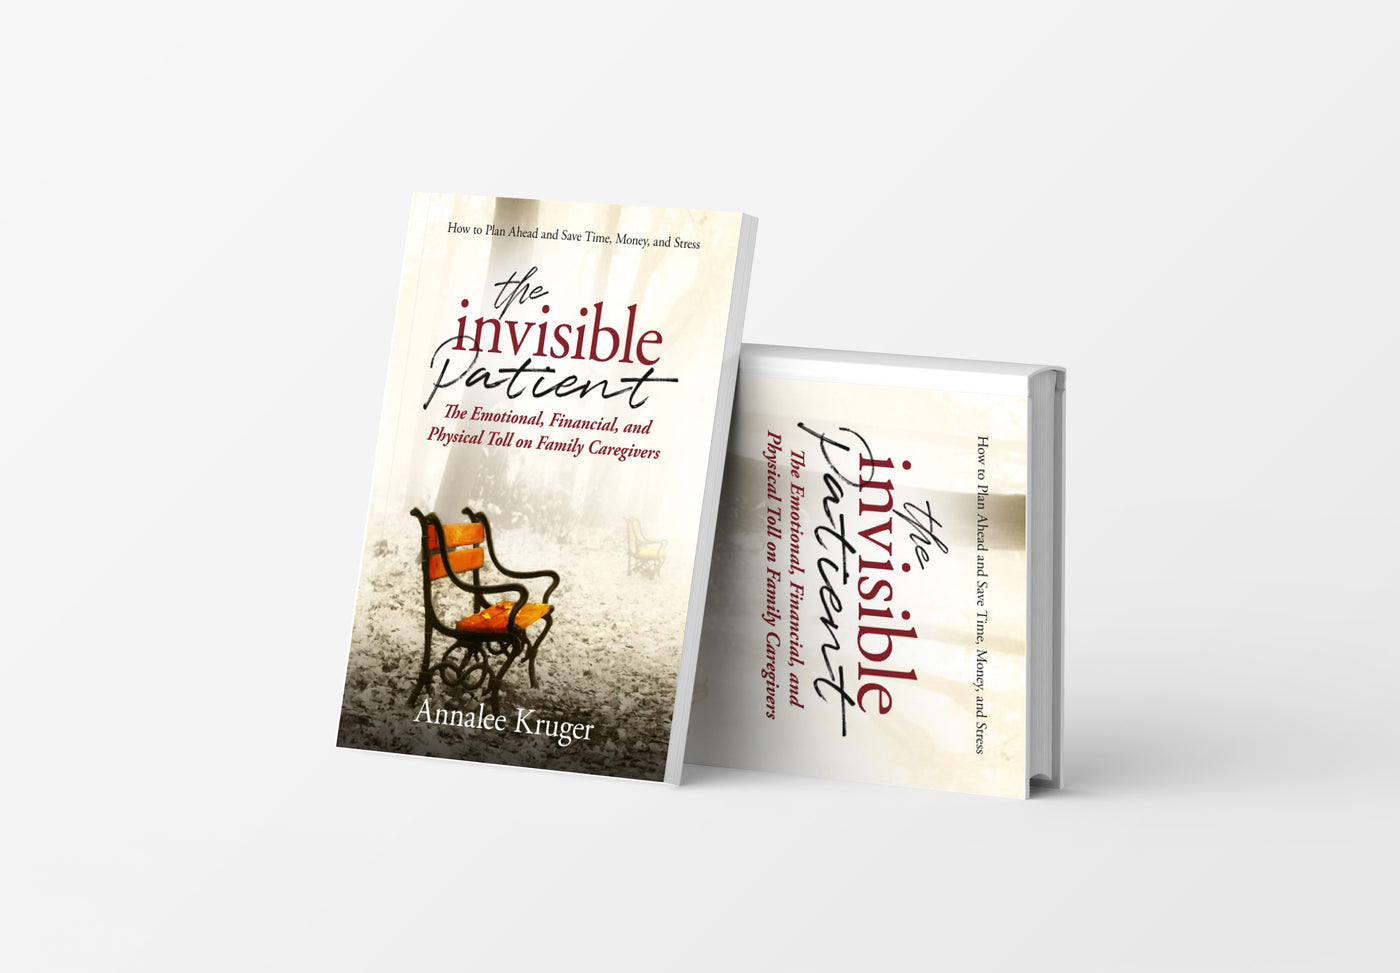 The Invisible Patient Book by Annalee Kruger